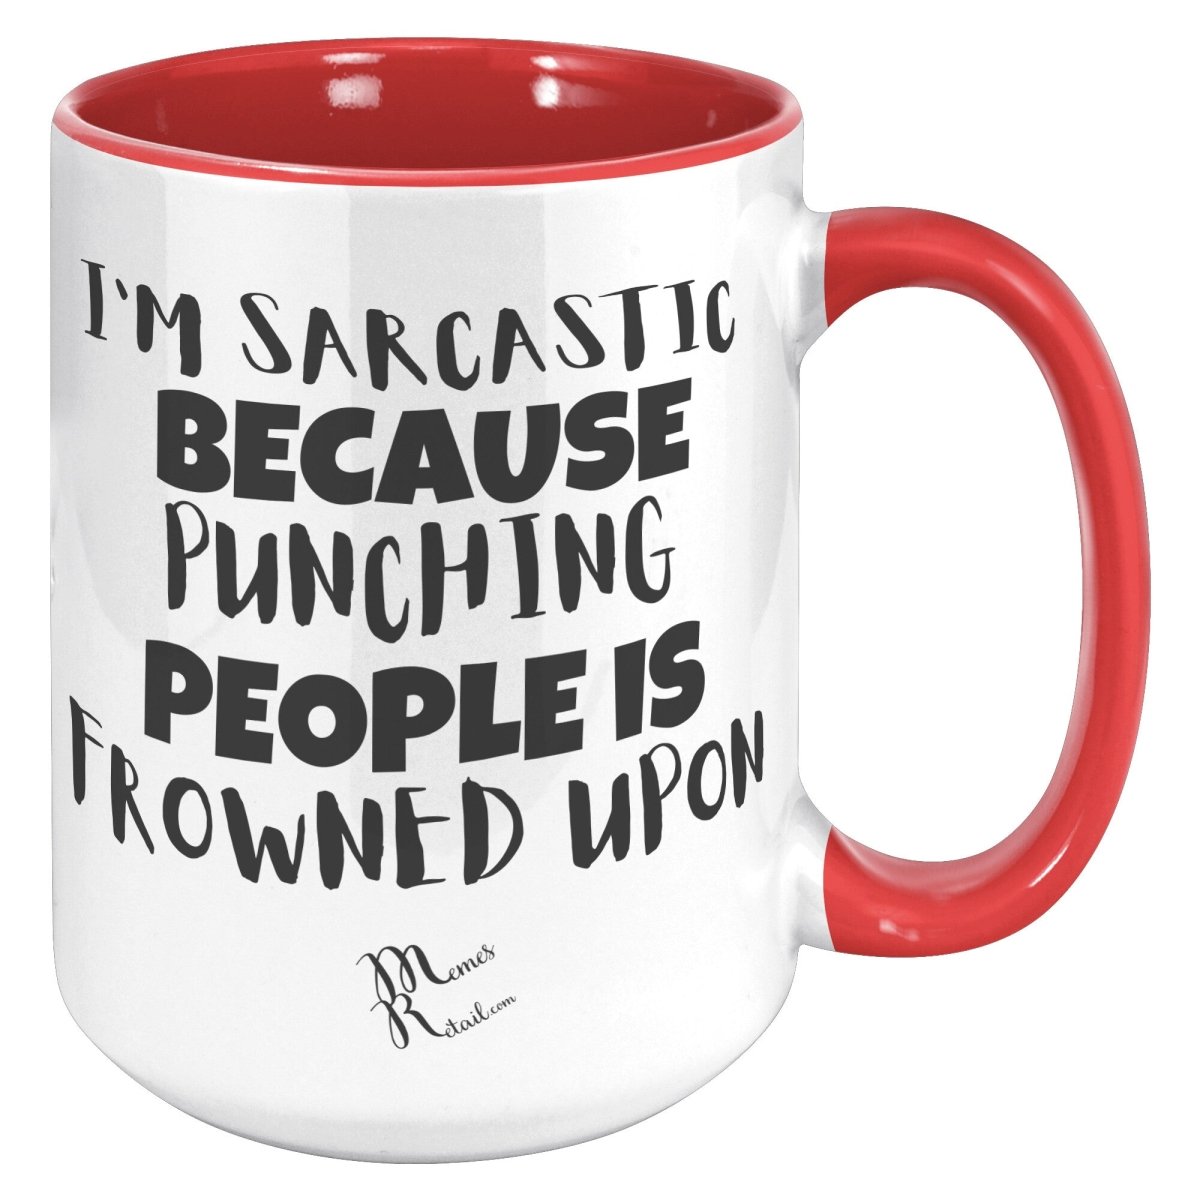 I'm Sarcastic Because Punching People is frowned upon 11oz 15oz Mugs, 15oz Accent Mug / Red - MemesRetail.com